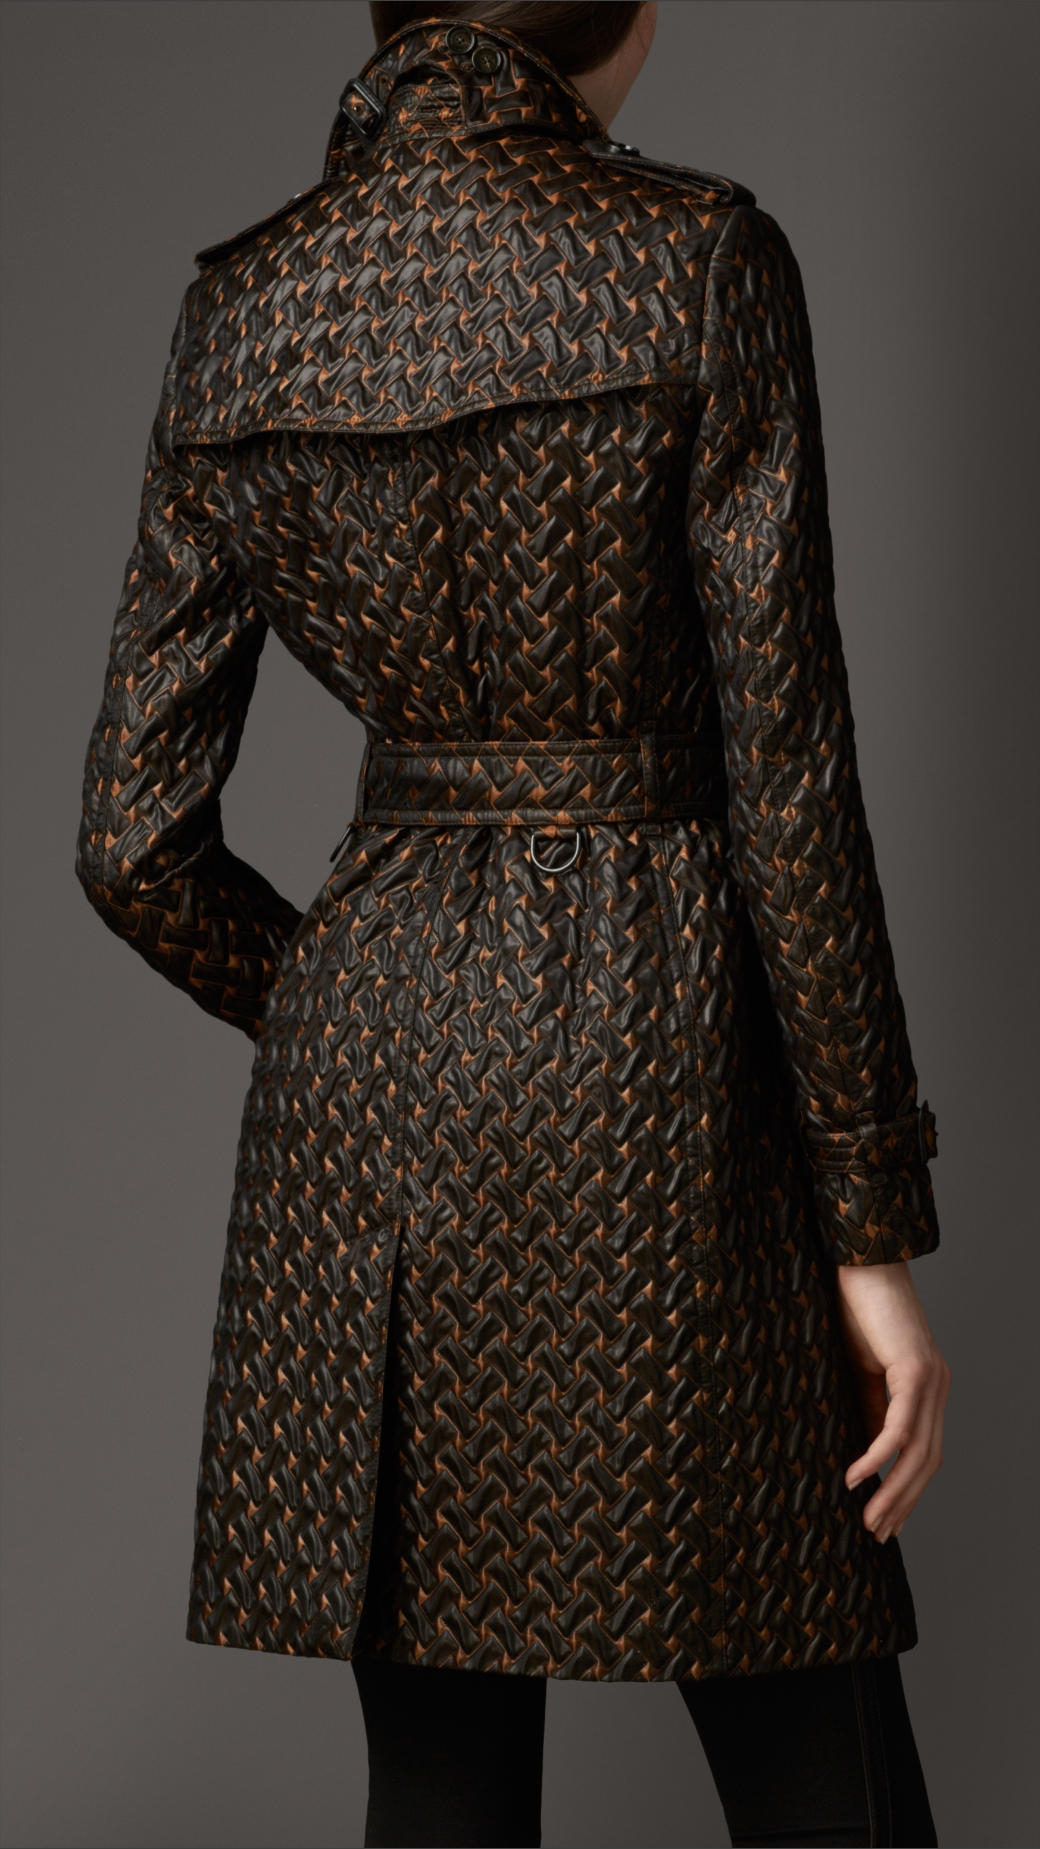 Lyst - Burberry Textured Jacquard Trench Coat in Metallic